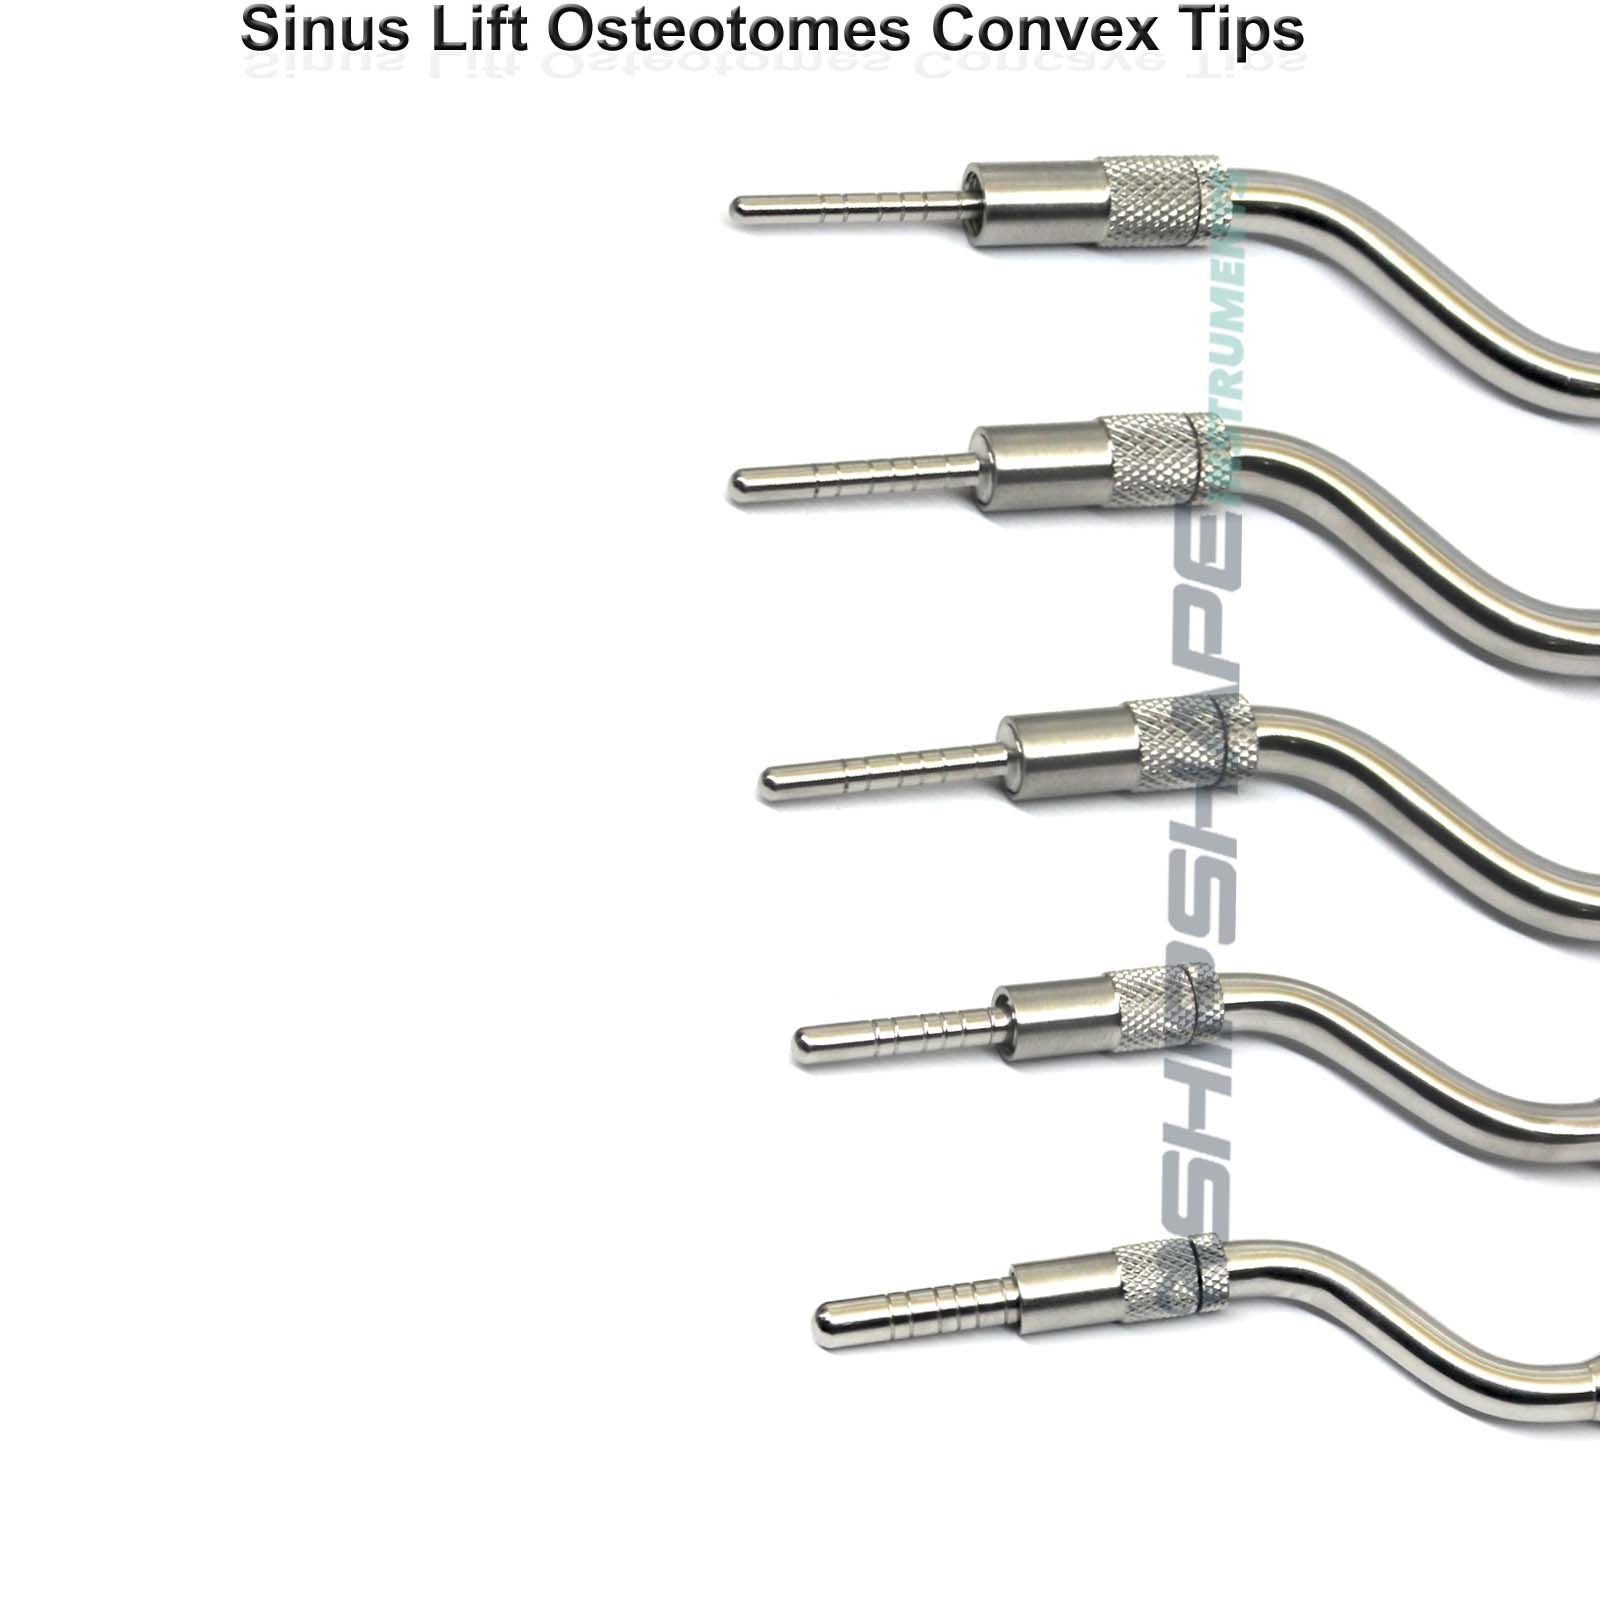 5 pcs Osteotomes Convex tip Angled Dental implant Instruments with Surgical Cassette-1346